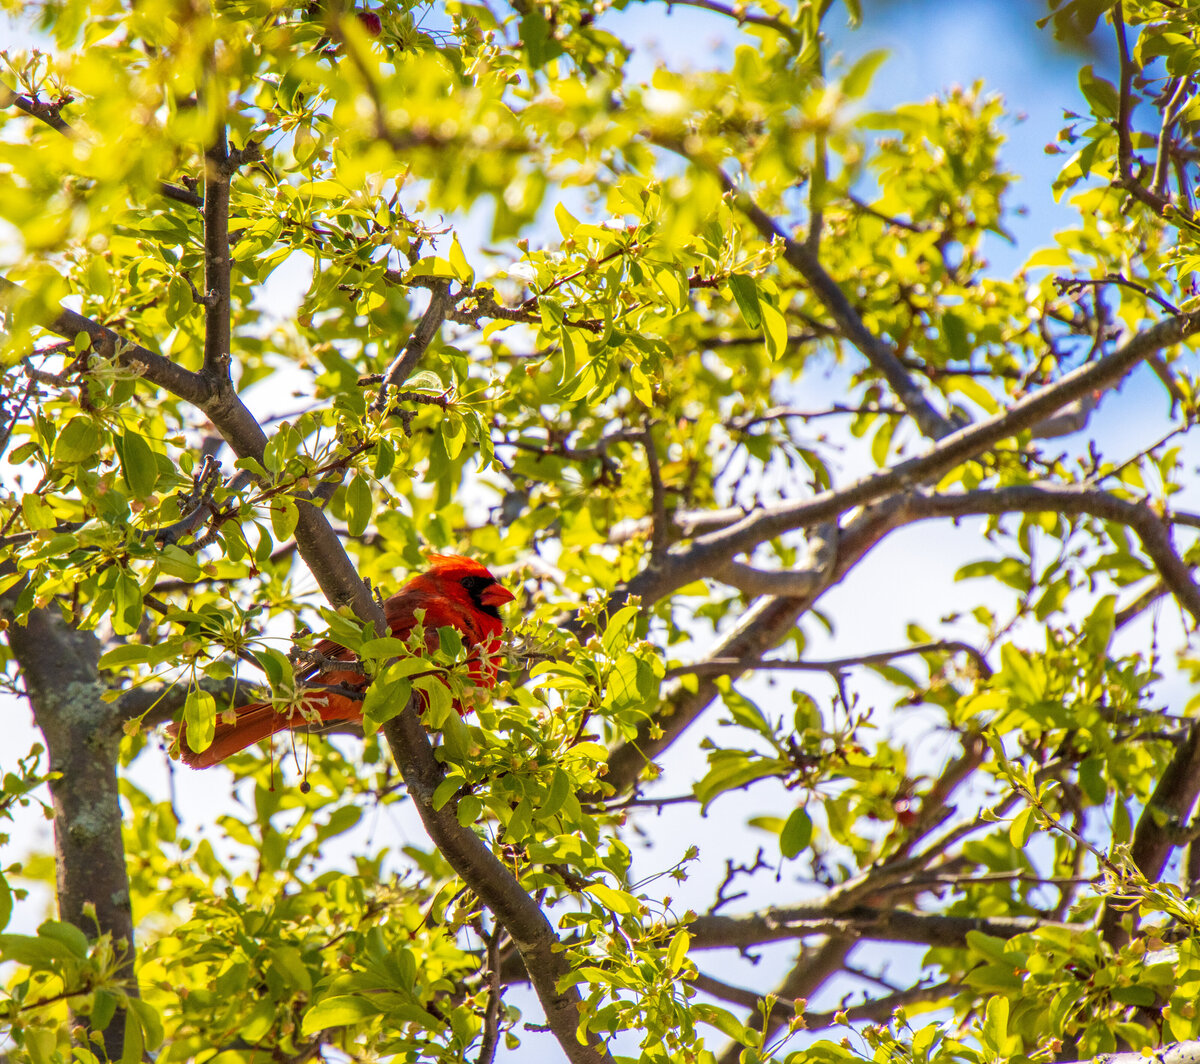 042521 Cardinal in trees on campus square